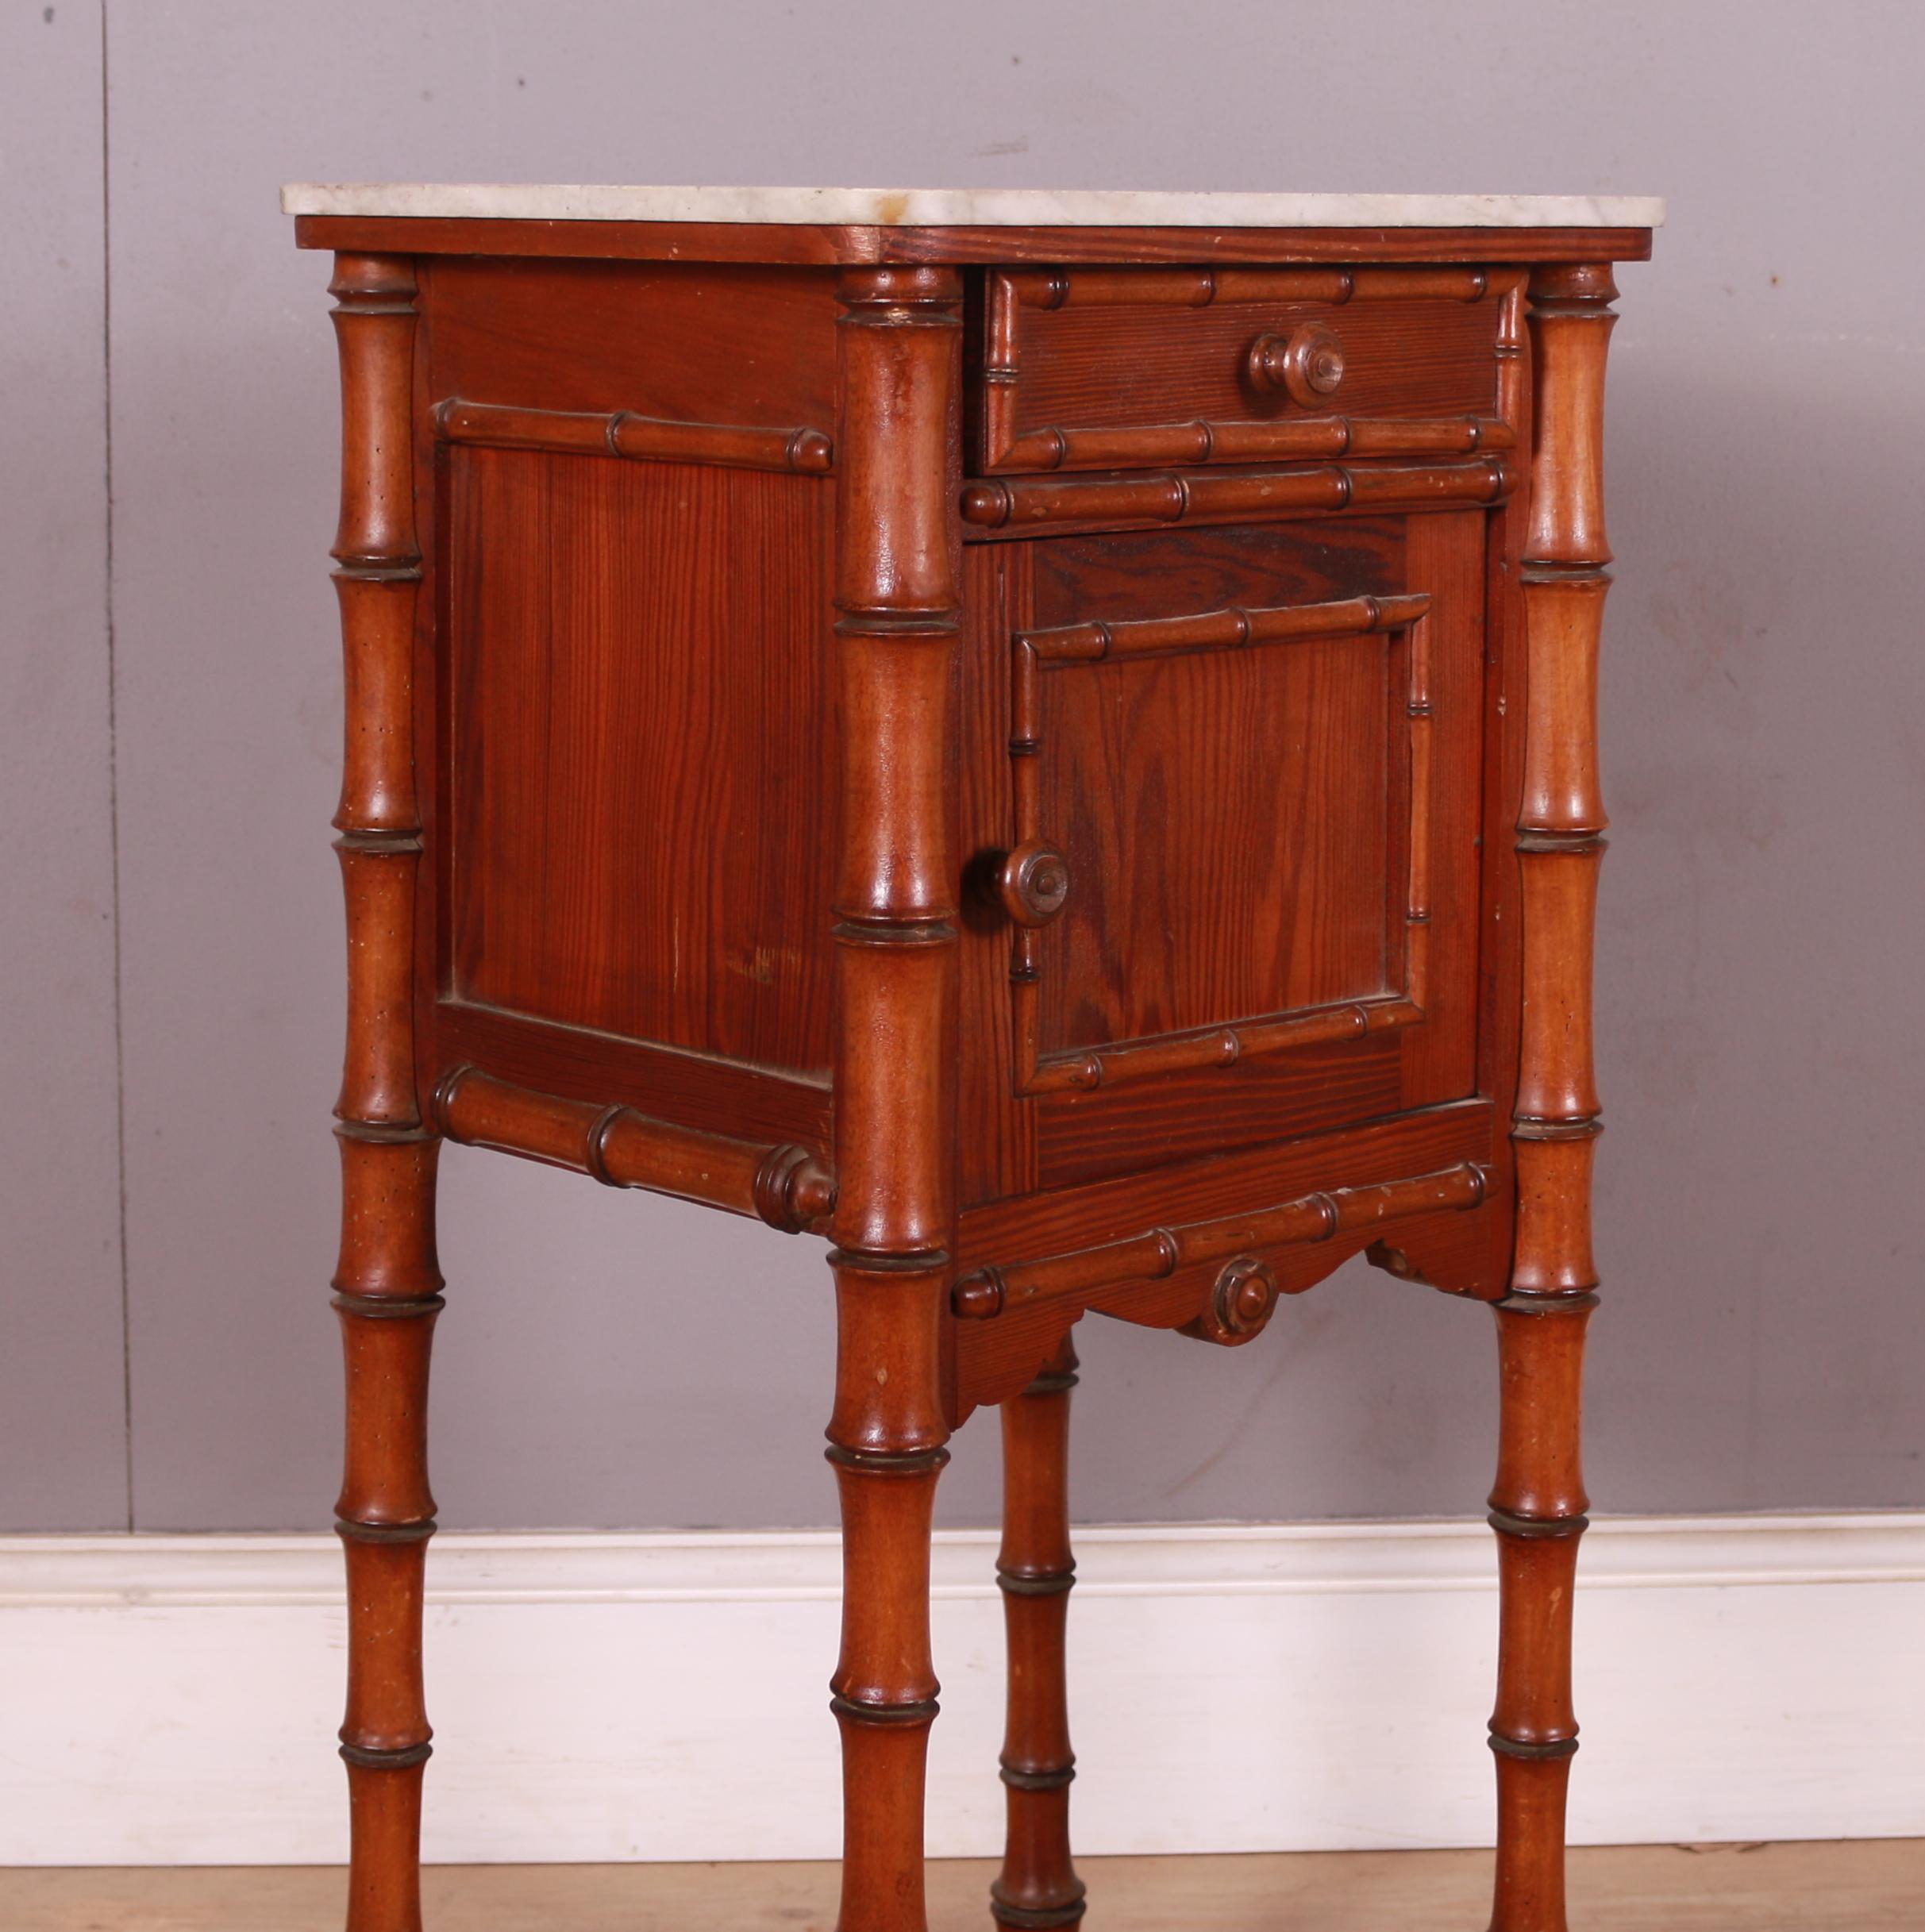 Late 19th C French marble topped faux bamboo bedside cupboard. 1890.

Reference: 7536

Dimensions
16 inches (41 cms) wide
14 inches (36 cms) deep
33.5 inches (85 cms) high.